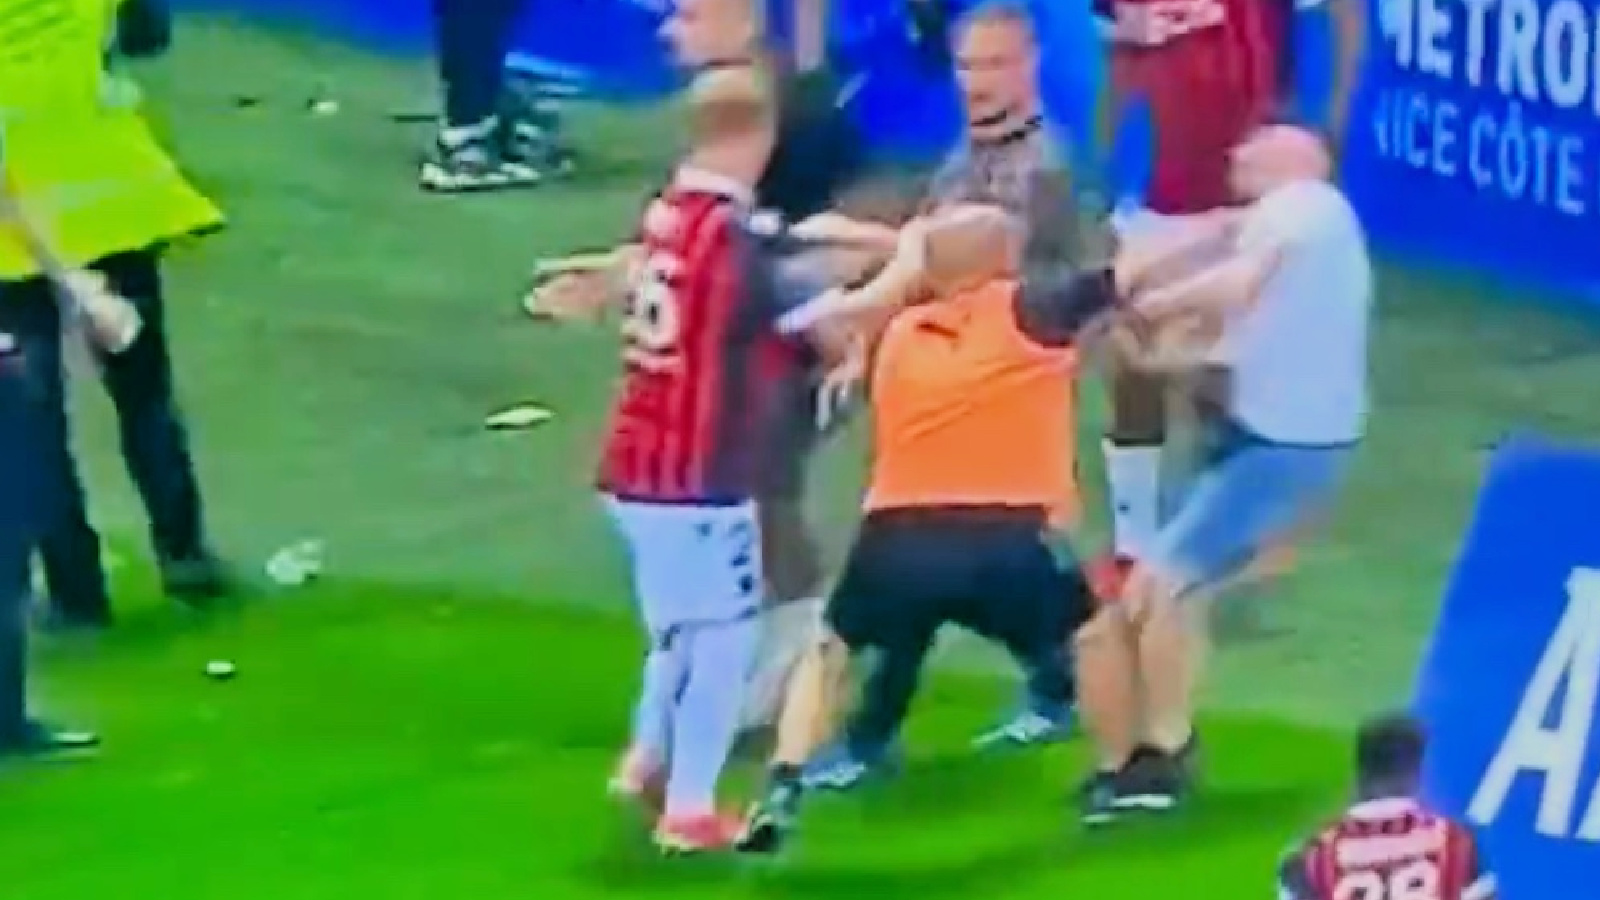 Marseille coach knocks a Nice fan out cold